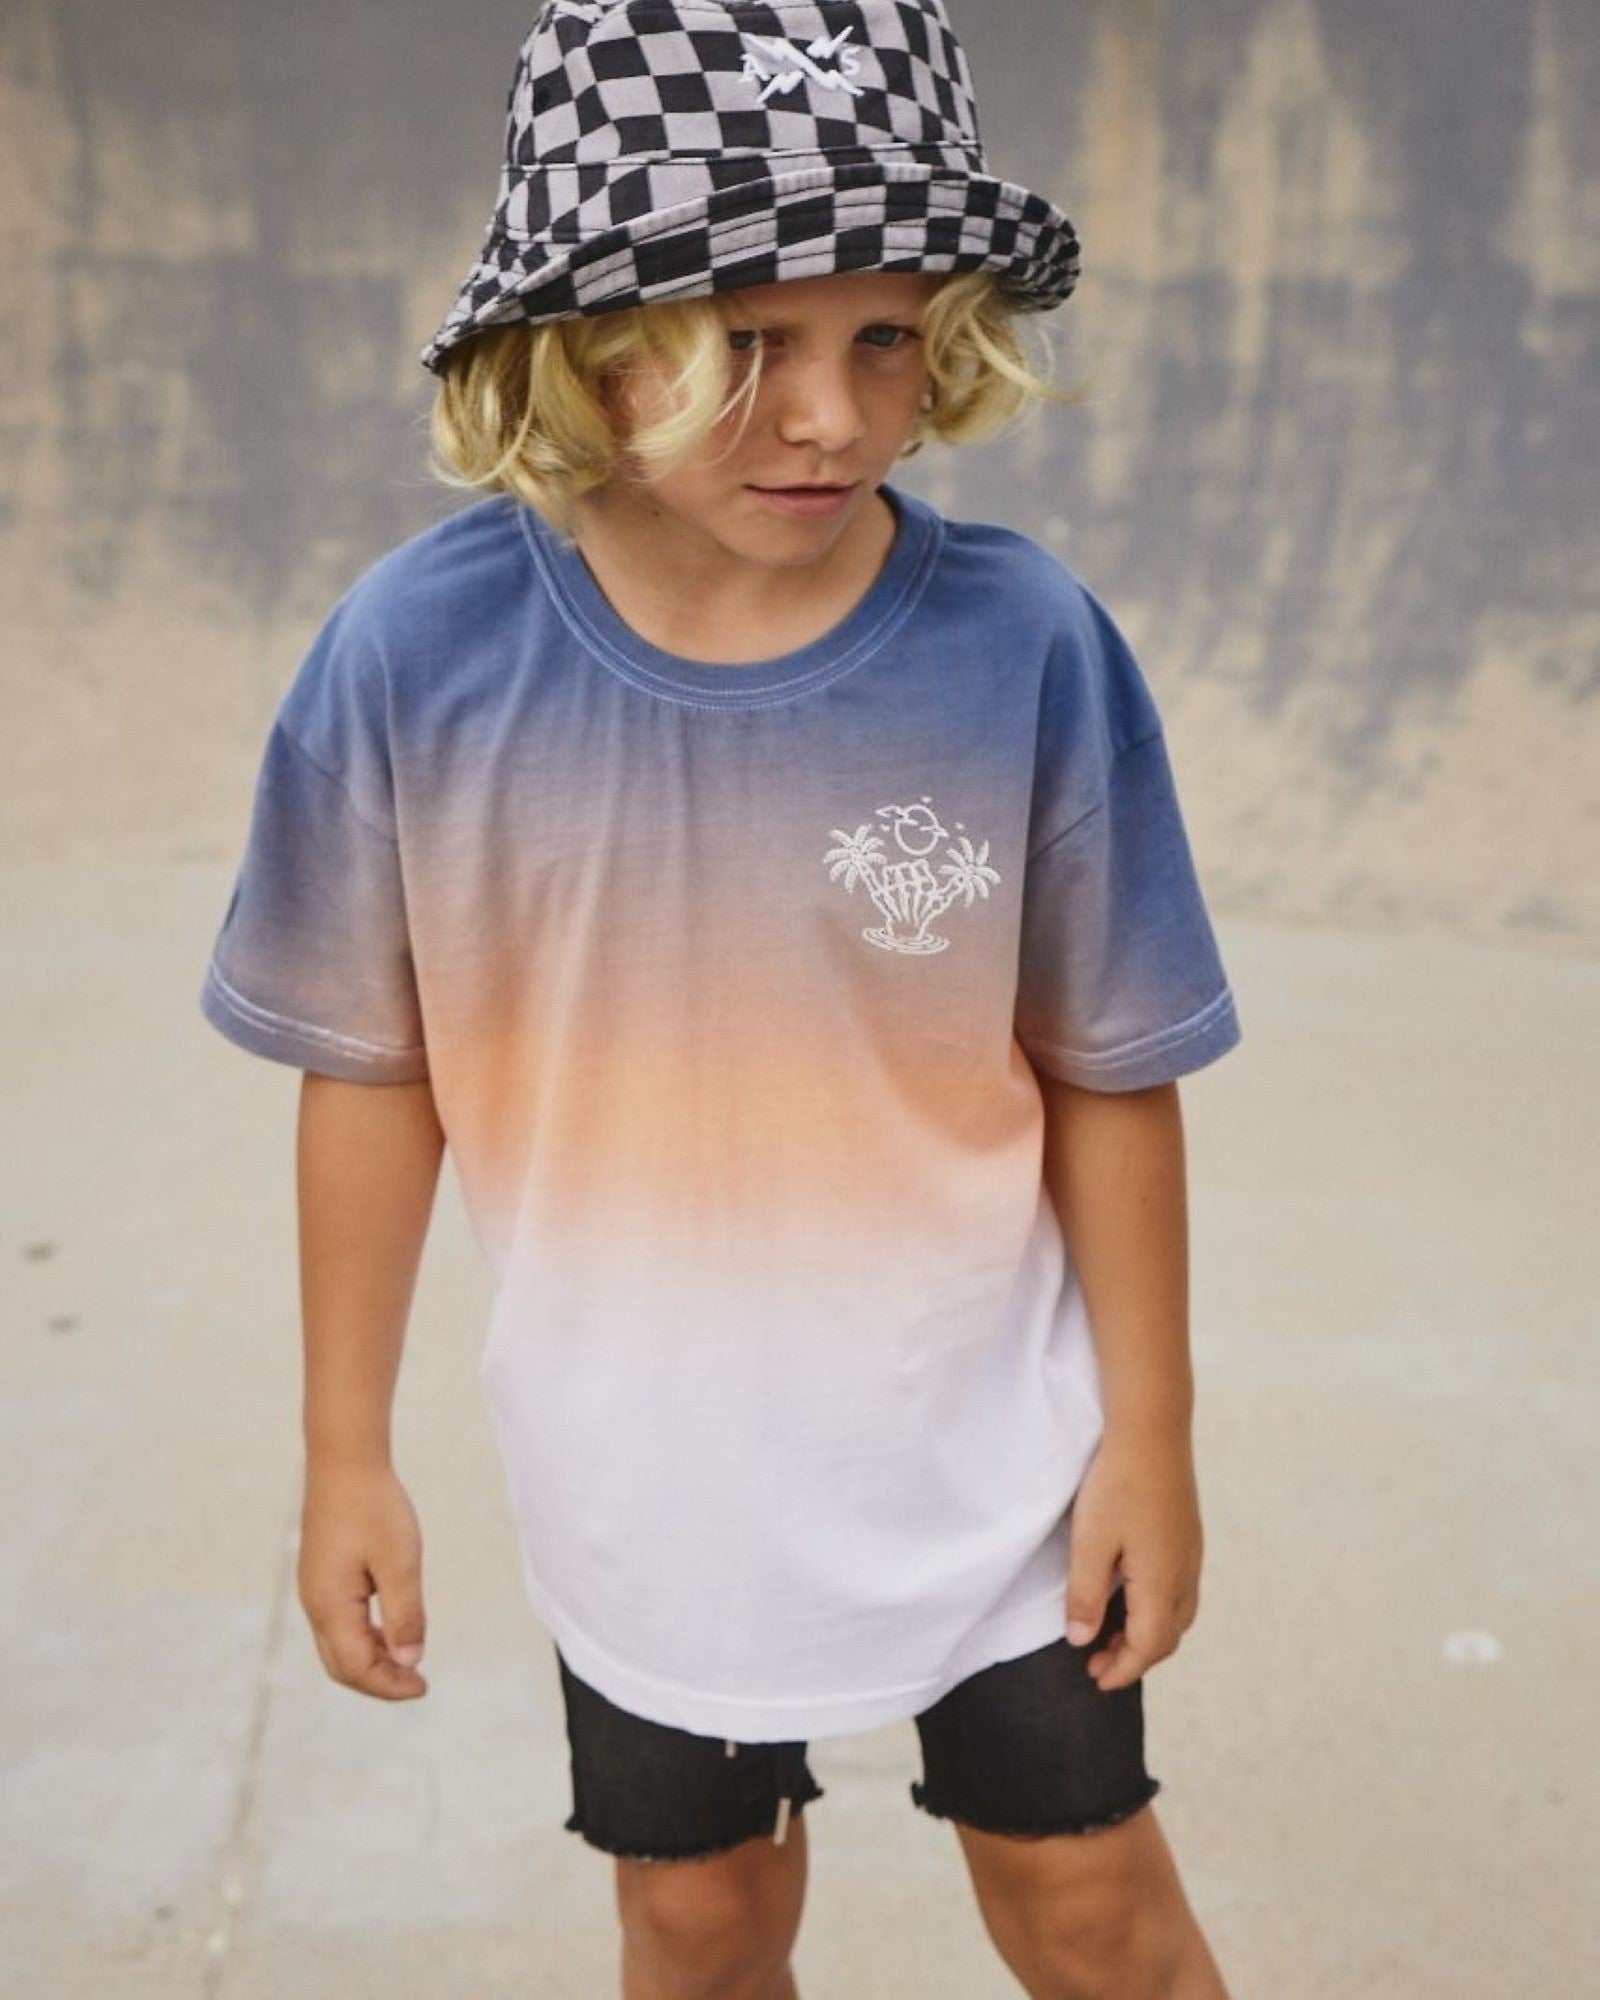 Alphabet Soup's Kids Reckless Denim Jogg Jean Shorts for boys aged 2-7. Crafted from stretch knit denim and vintage black, perfect for any marathon of adventure. Relaxed fit, elasticated waist, five pocket design.